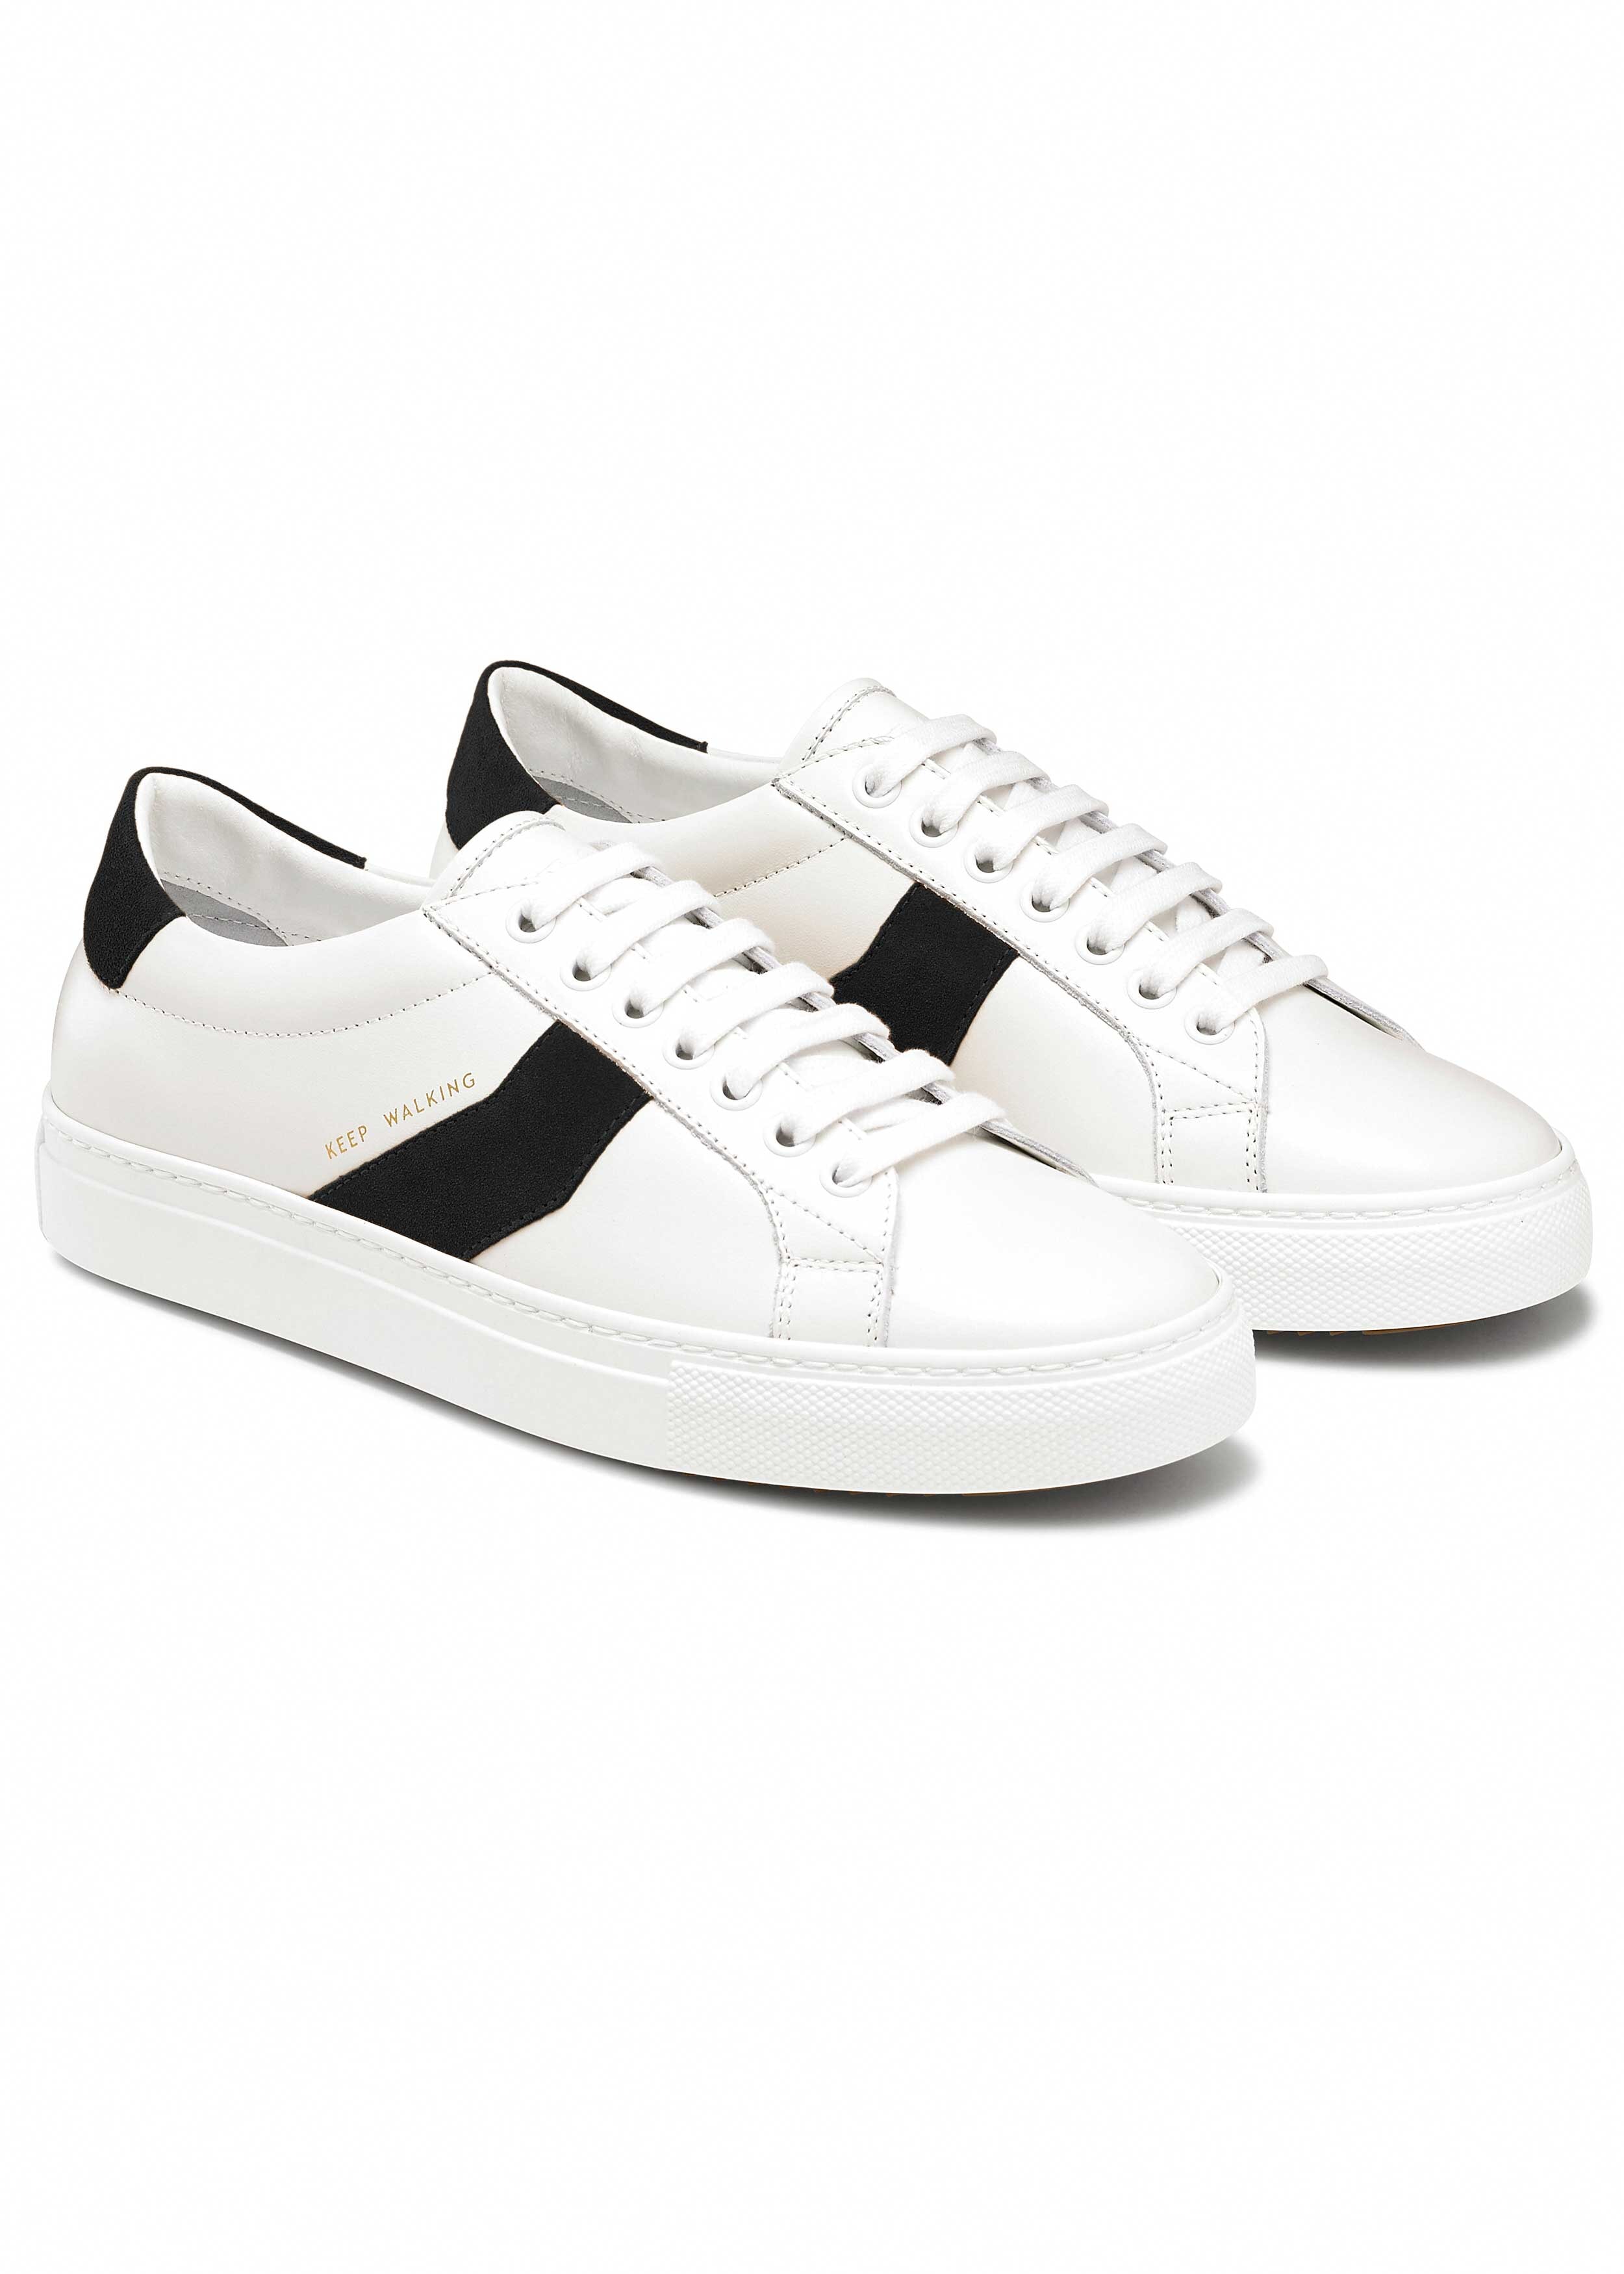 Leather Sneaker White/Black Suede